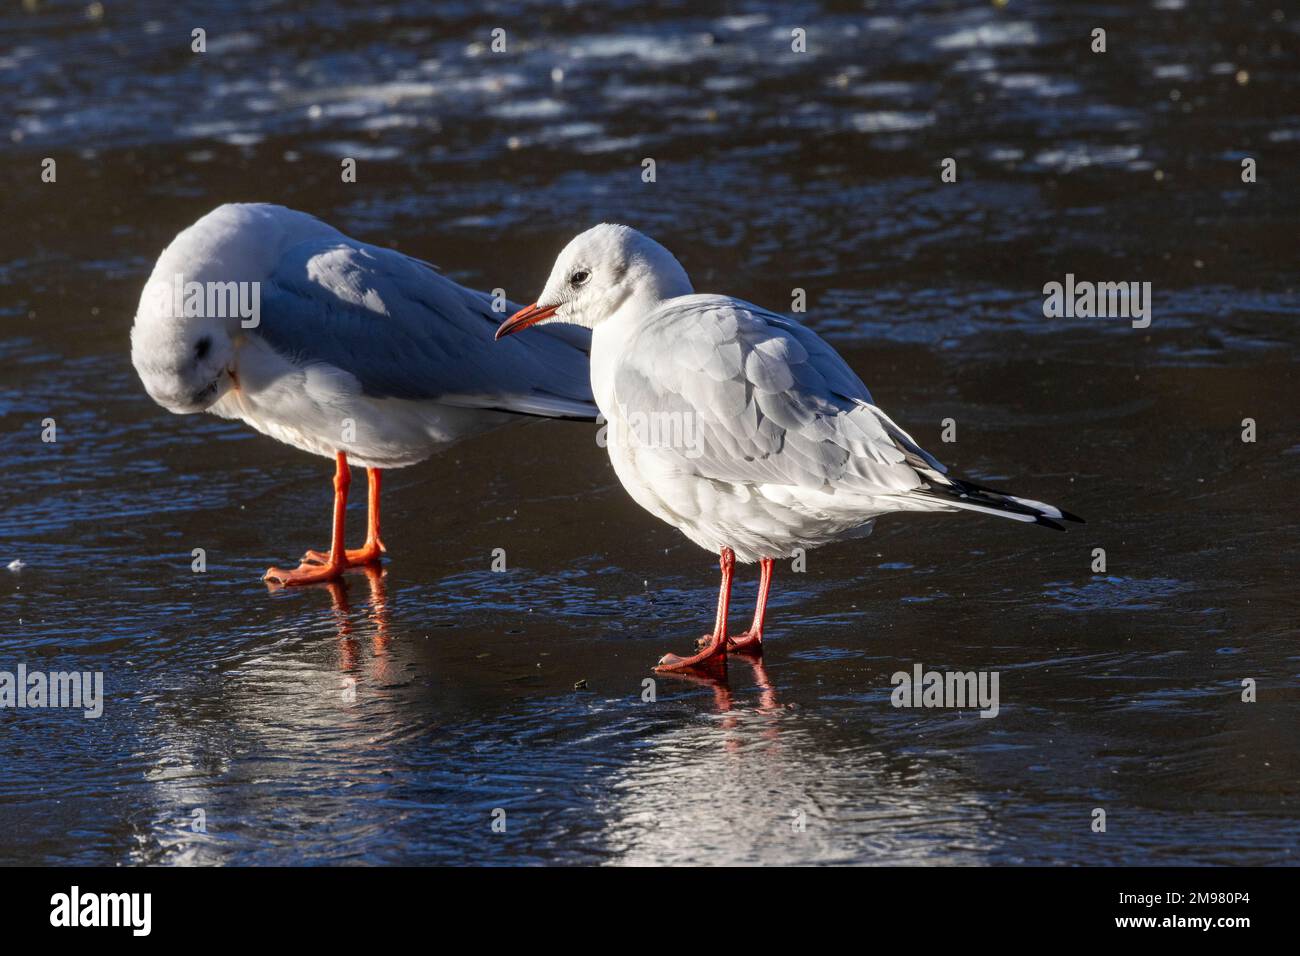 Black-headed Gulls relax on the ice of a frozen Mere. They lose the black head feathers in winter. Thei name-sake black head reappears in spring Stock Photo